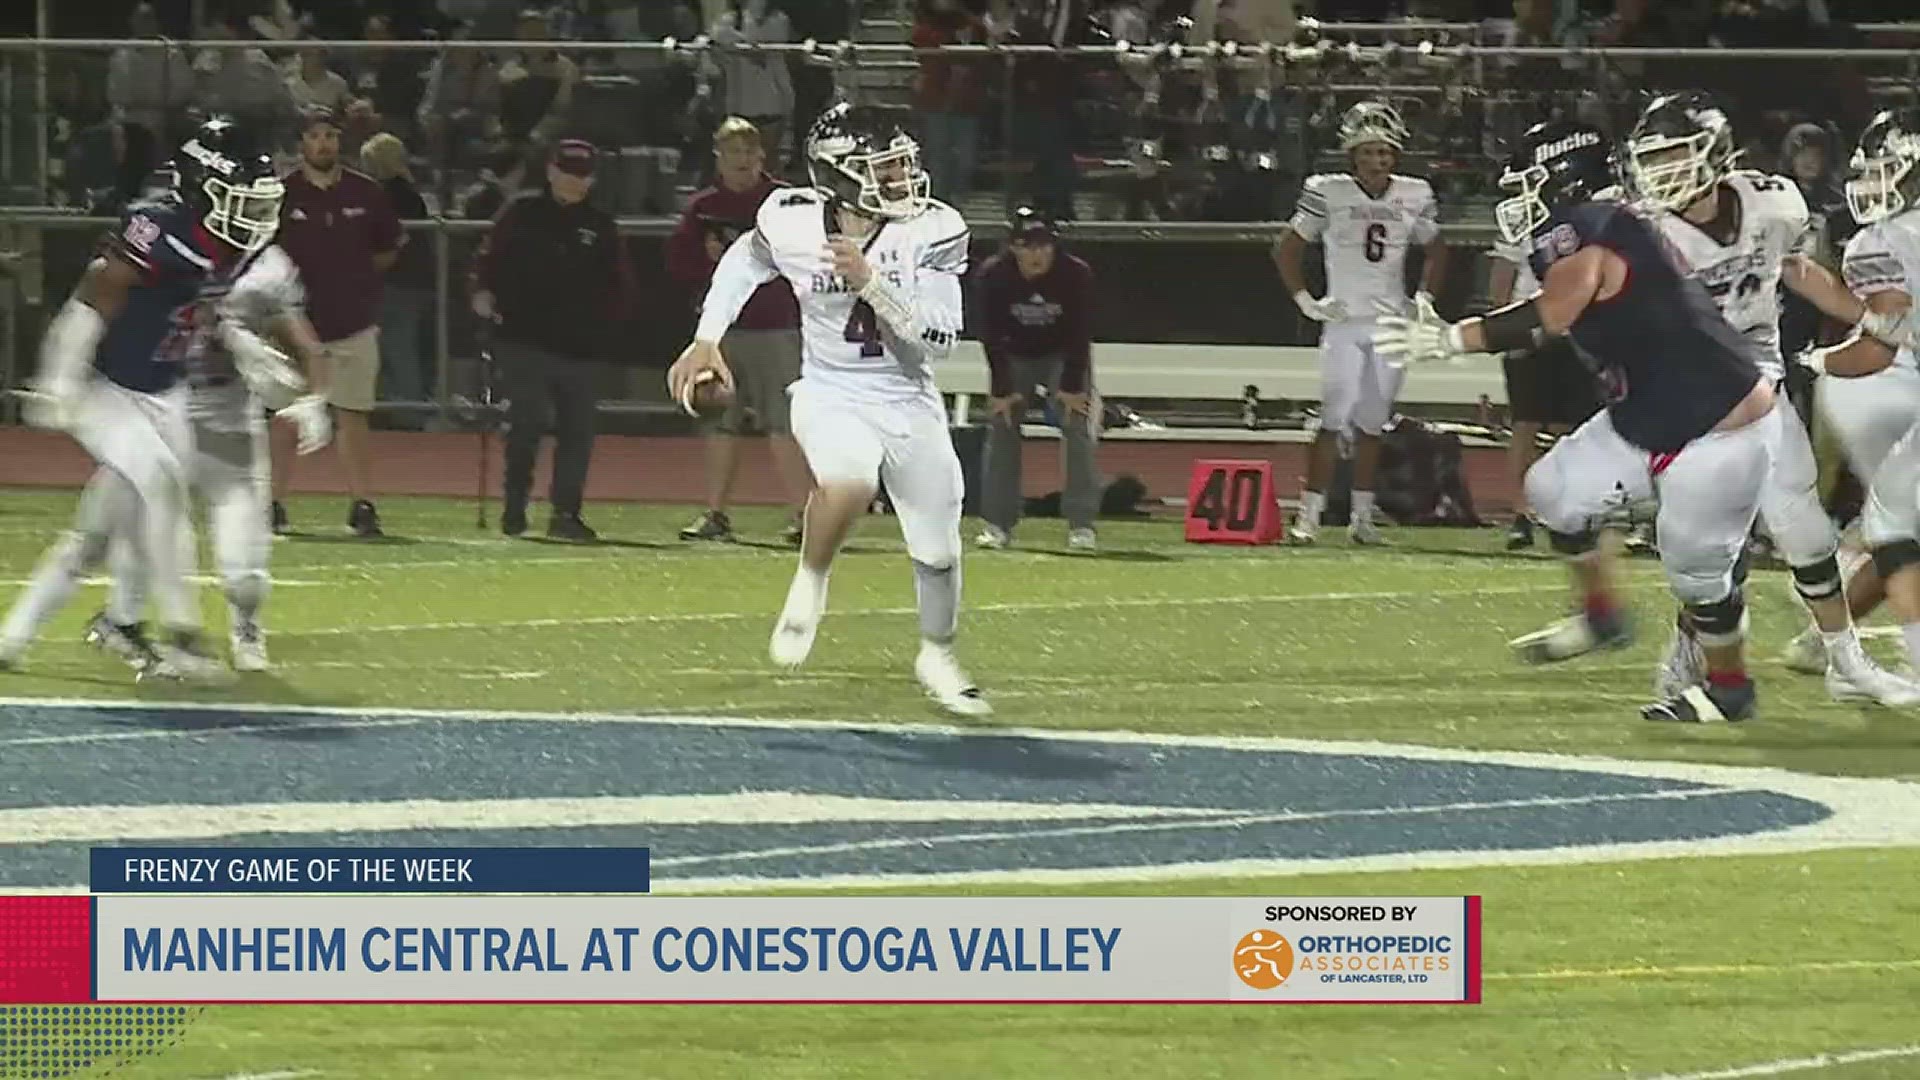 The Barons improve to 7-1 on the season with the win over Conestoga Valley.